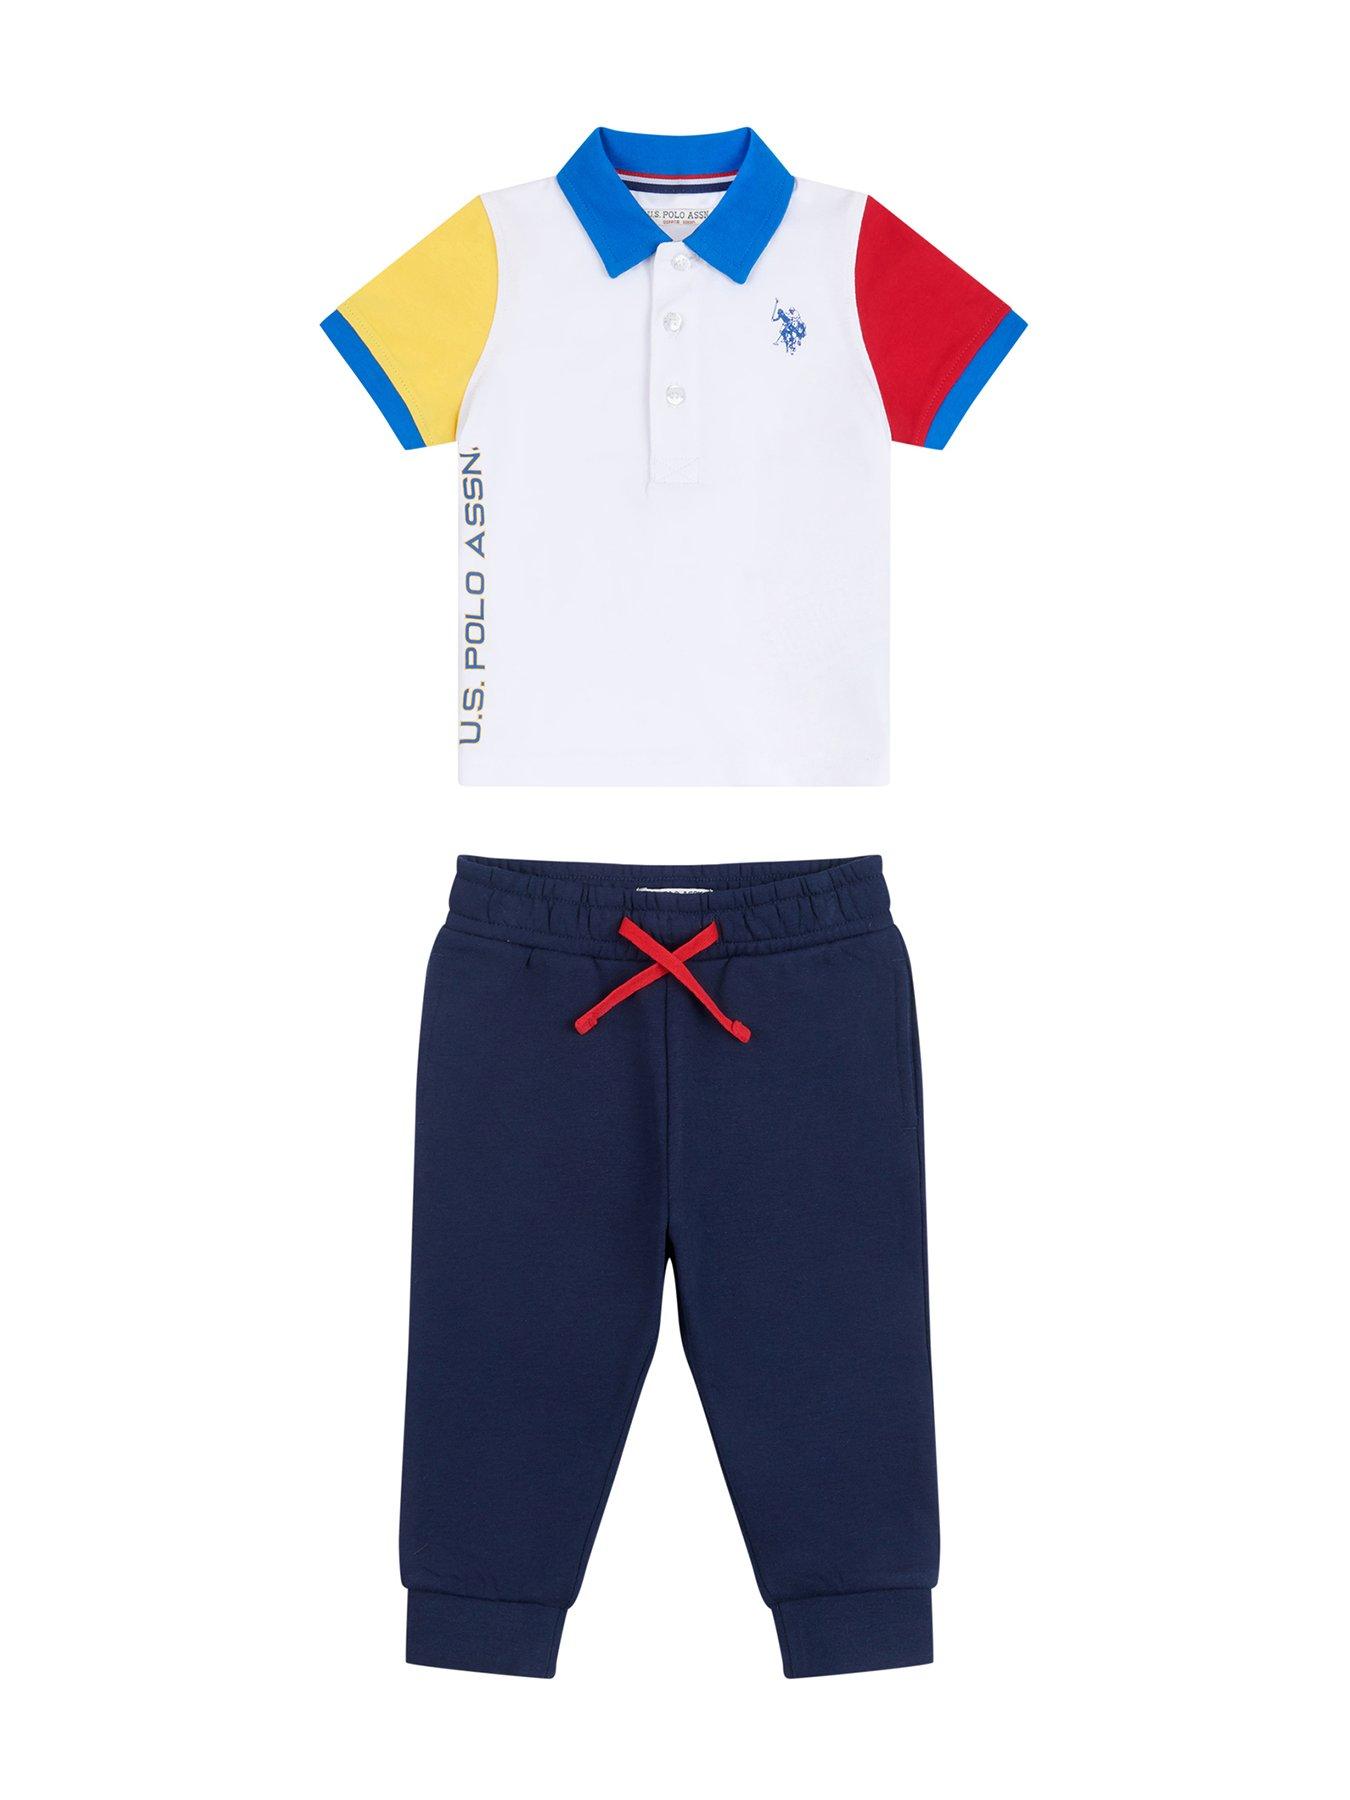 US POLO ASSN INFANT BABY BOY 2PC TRACKSUIT MSRP $ 38.00 